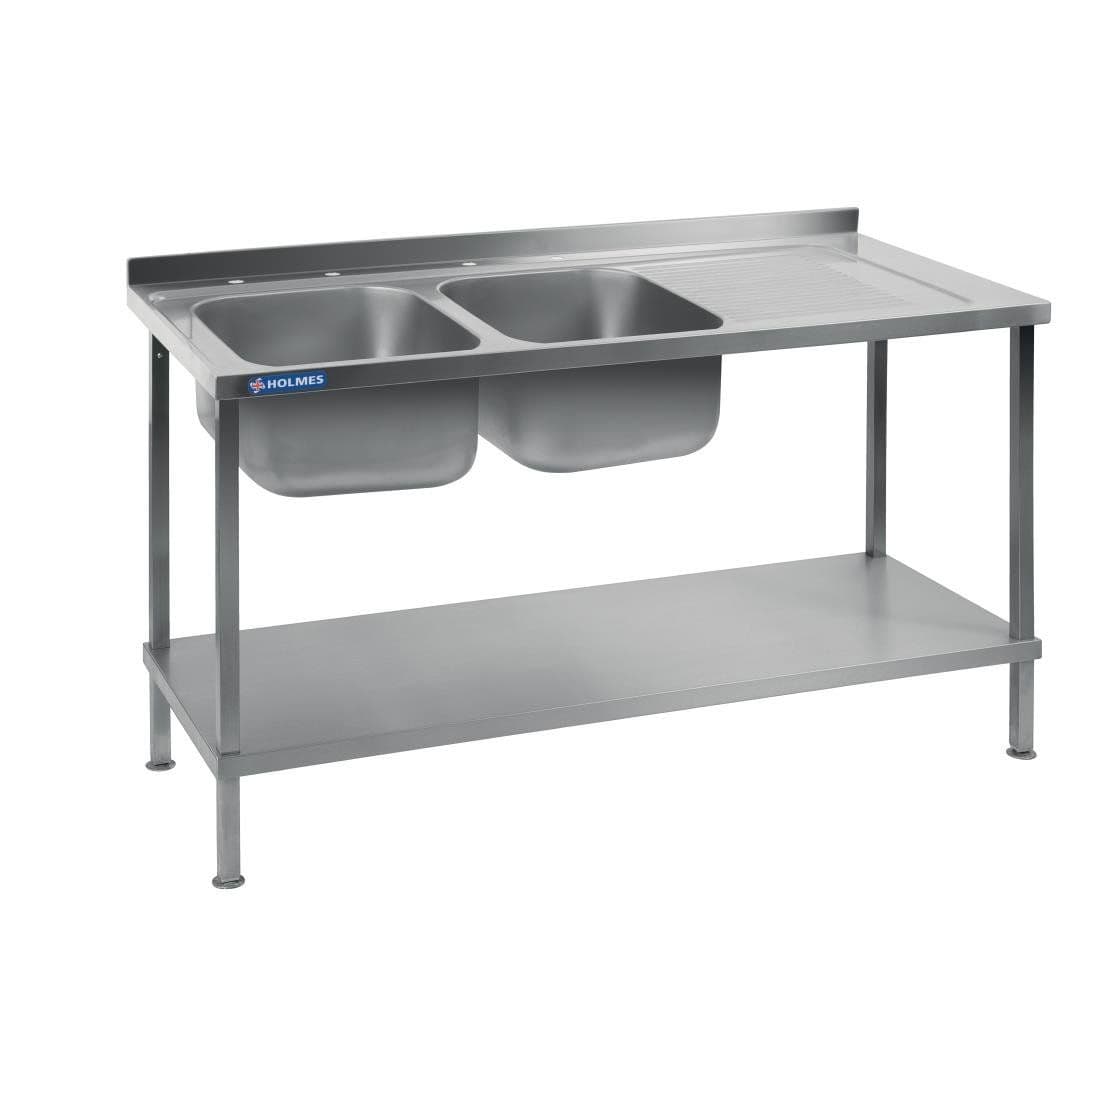 DR392 Holmes Fully Assembled Stainless Steel Sink Right Hand Drainer 1500mm JD Catering Equipment Solutions Ltd